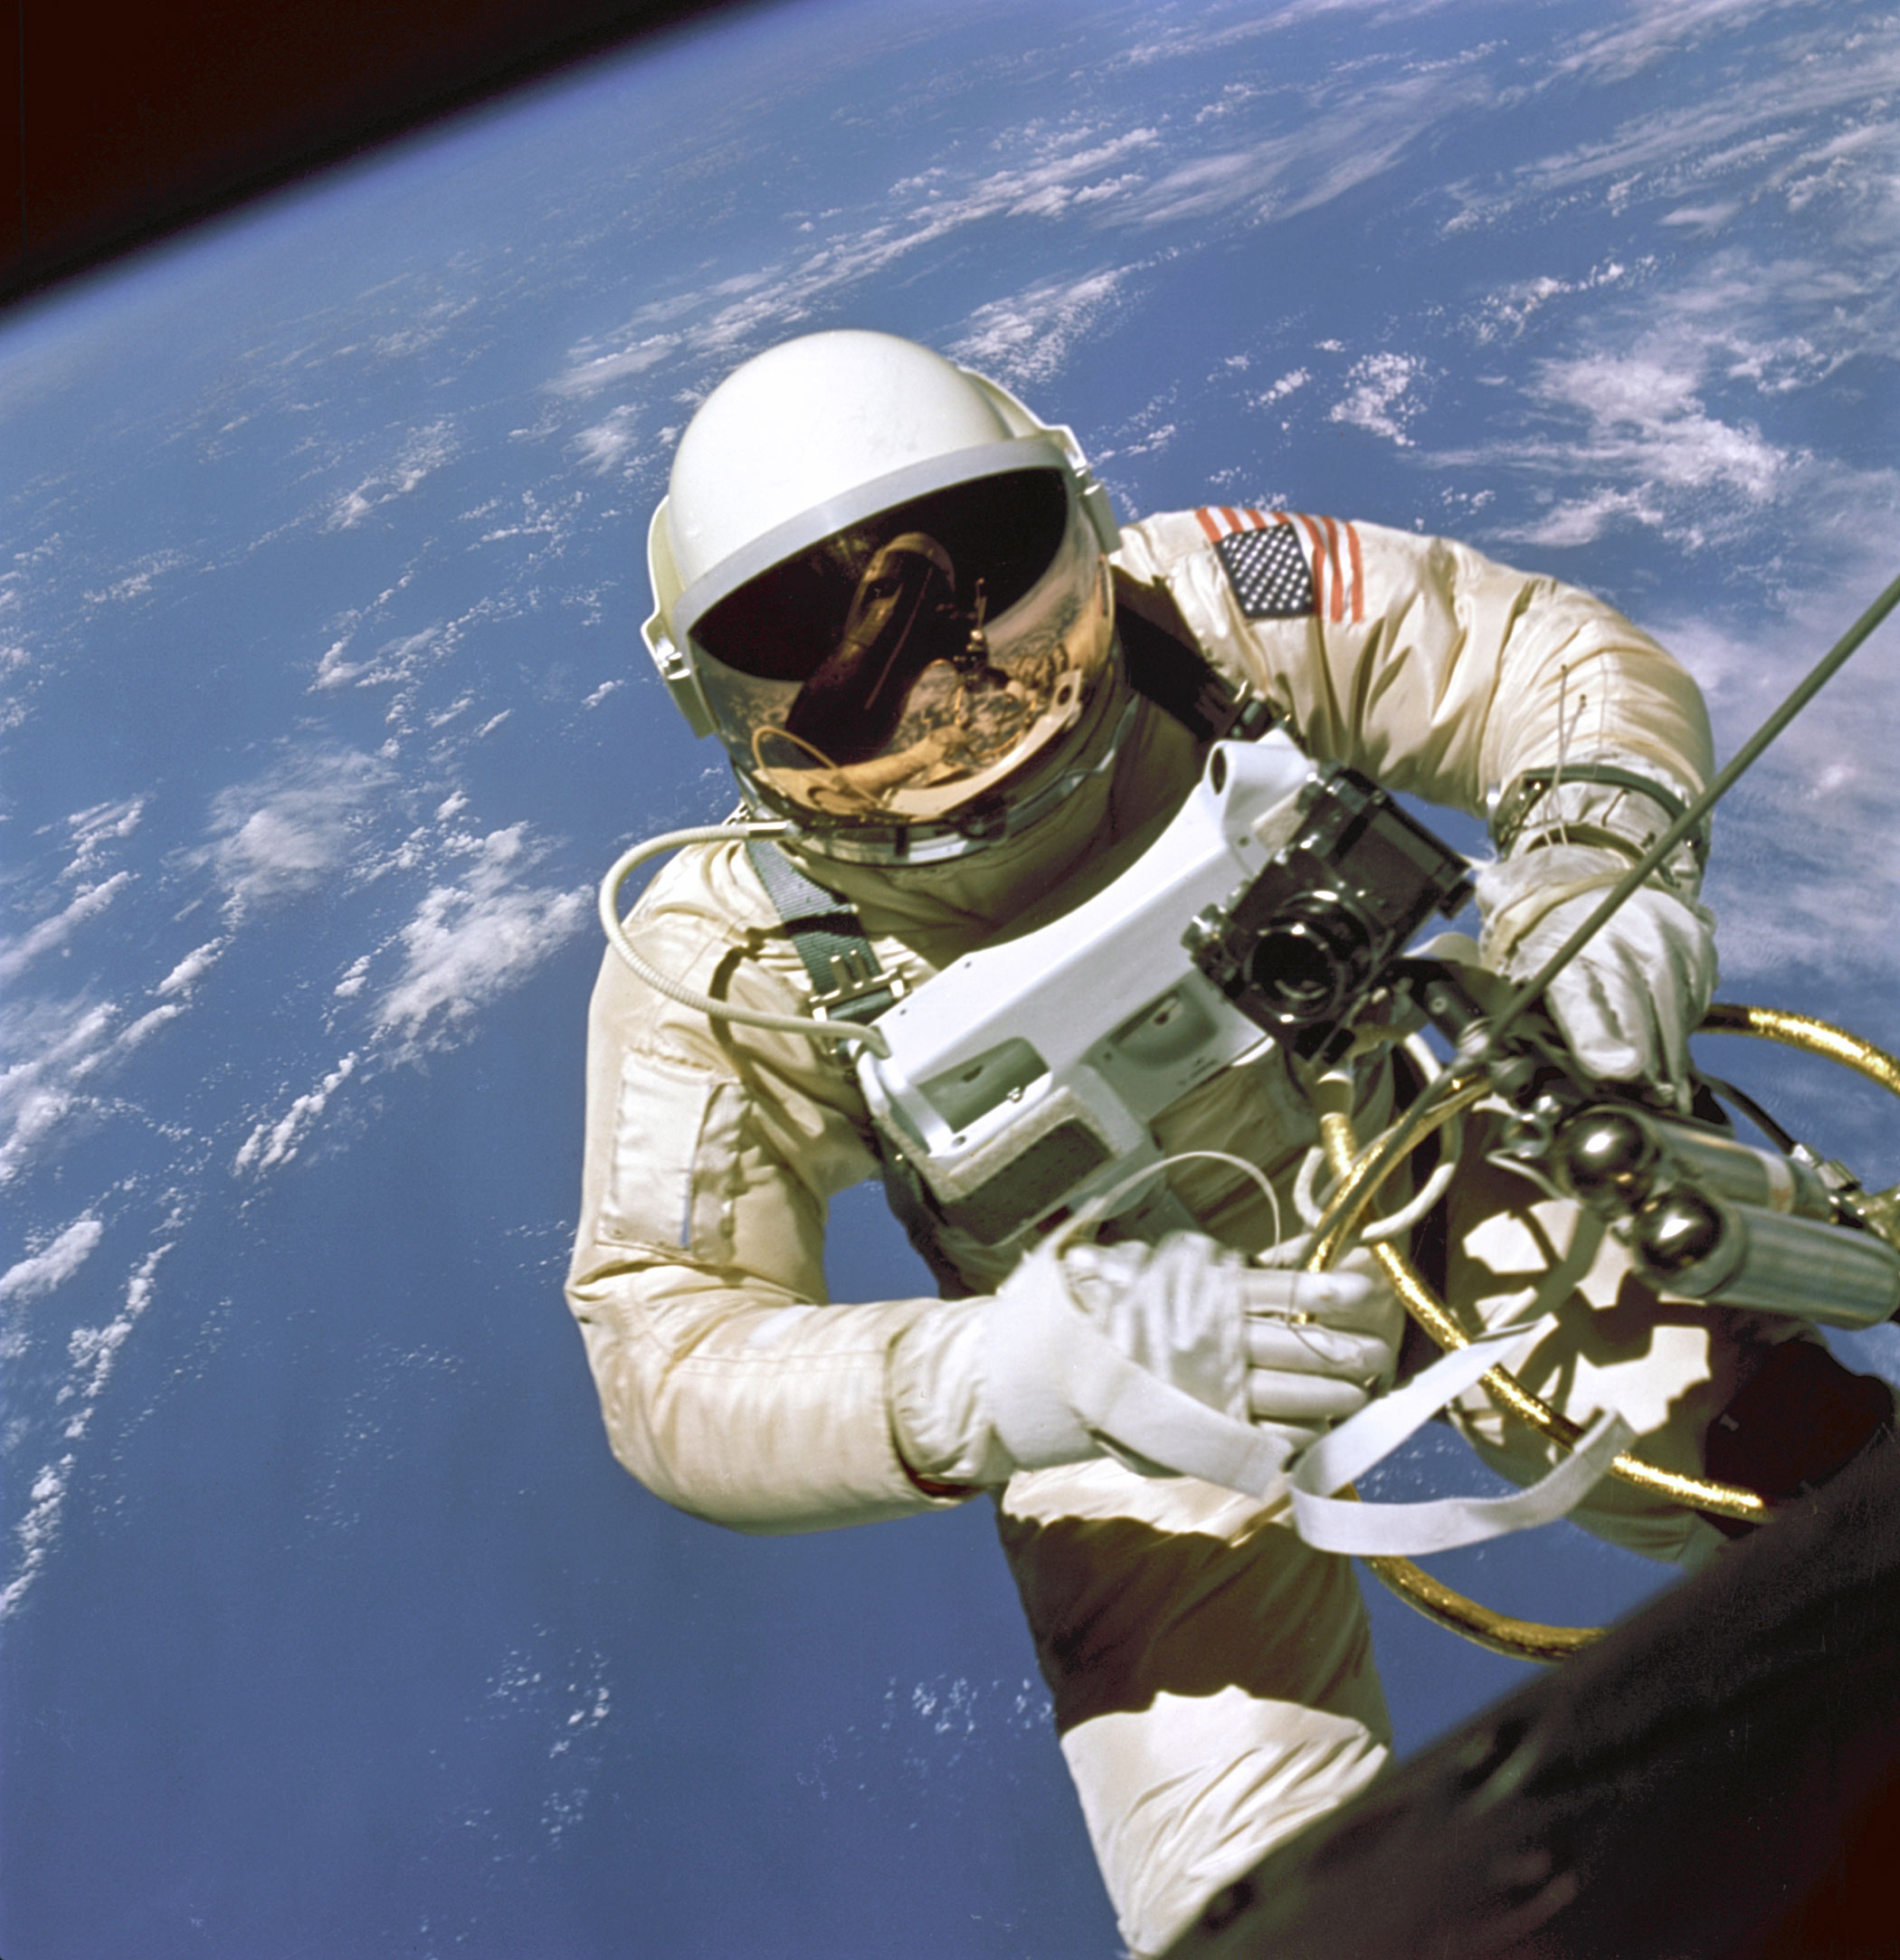 most-iconic-space-photo-spacewalk